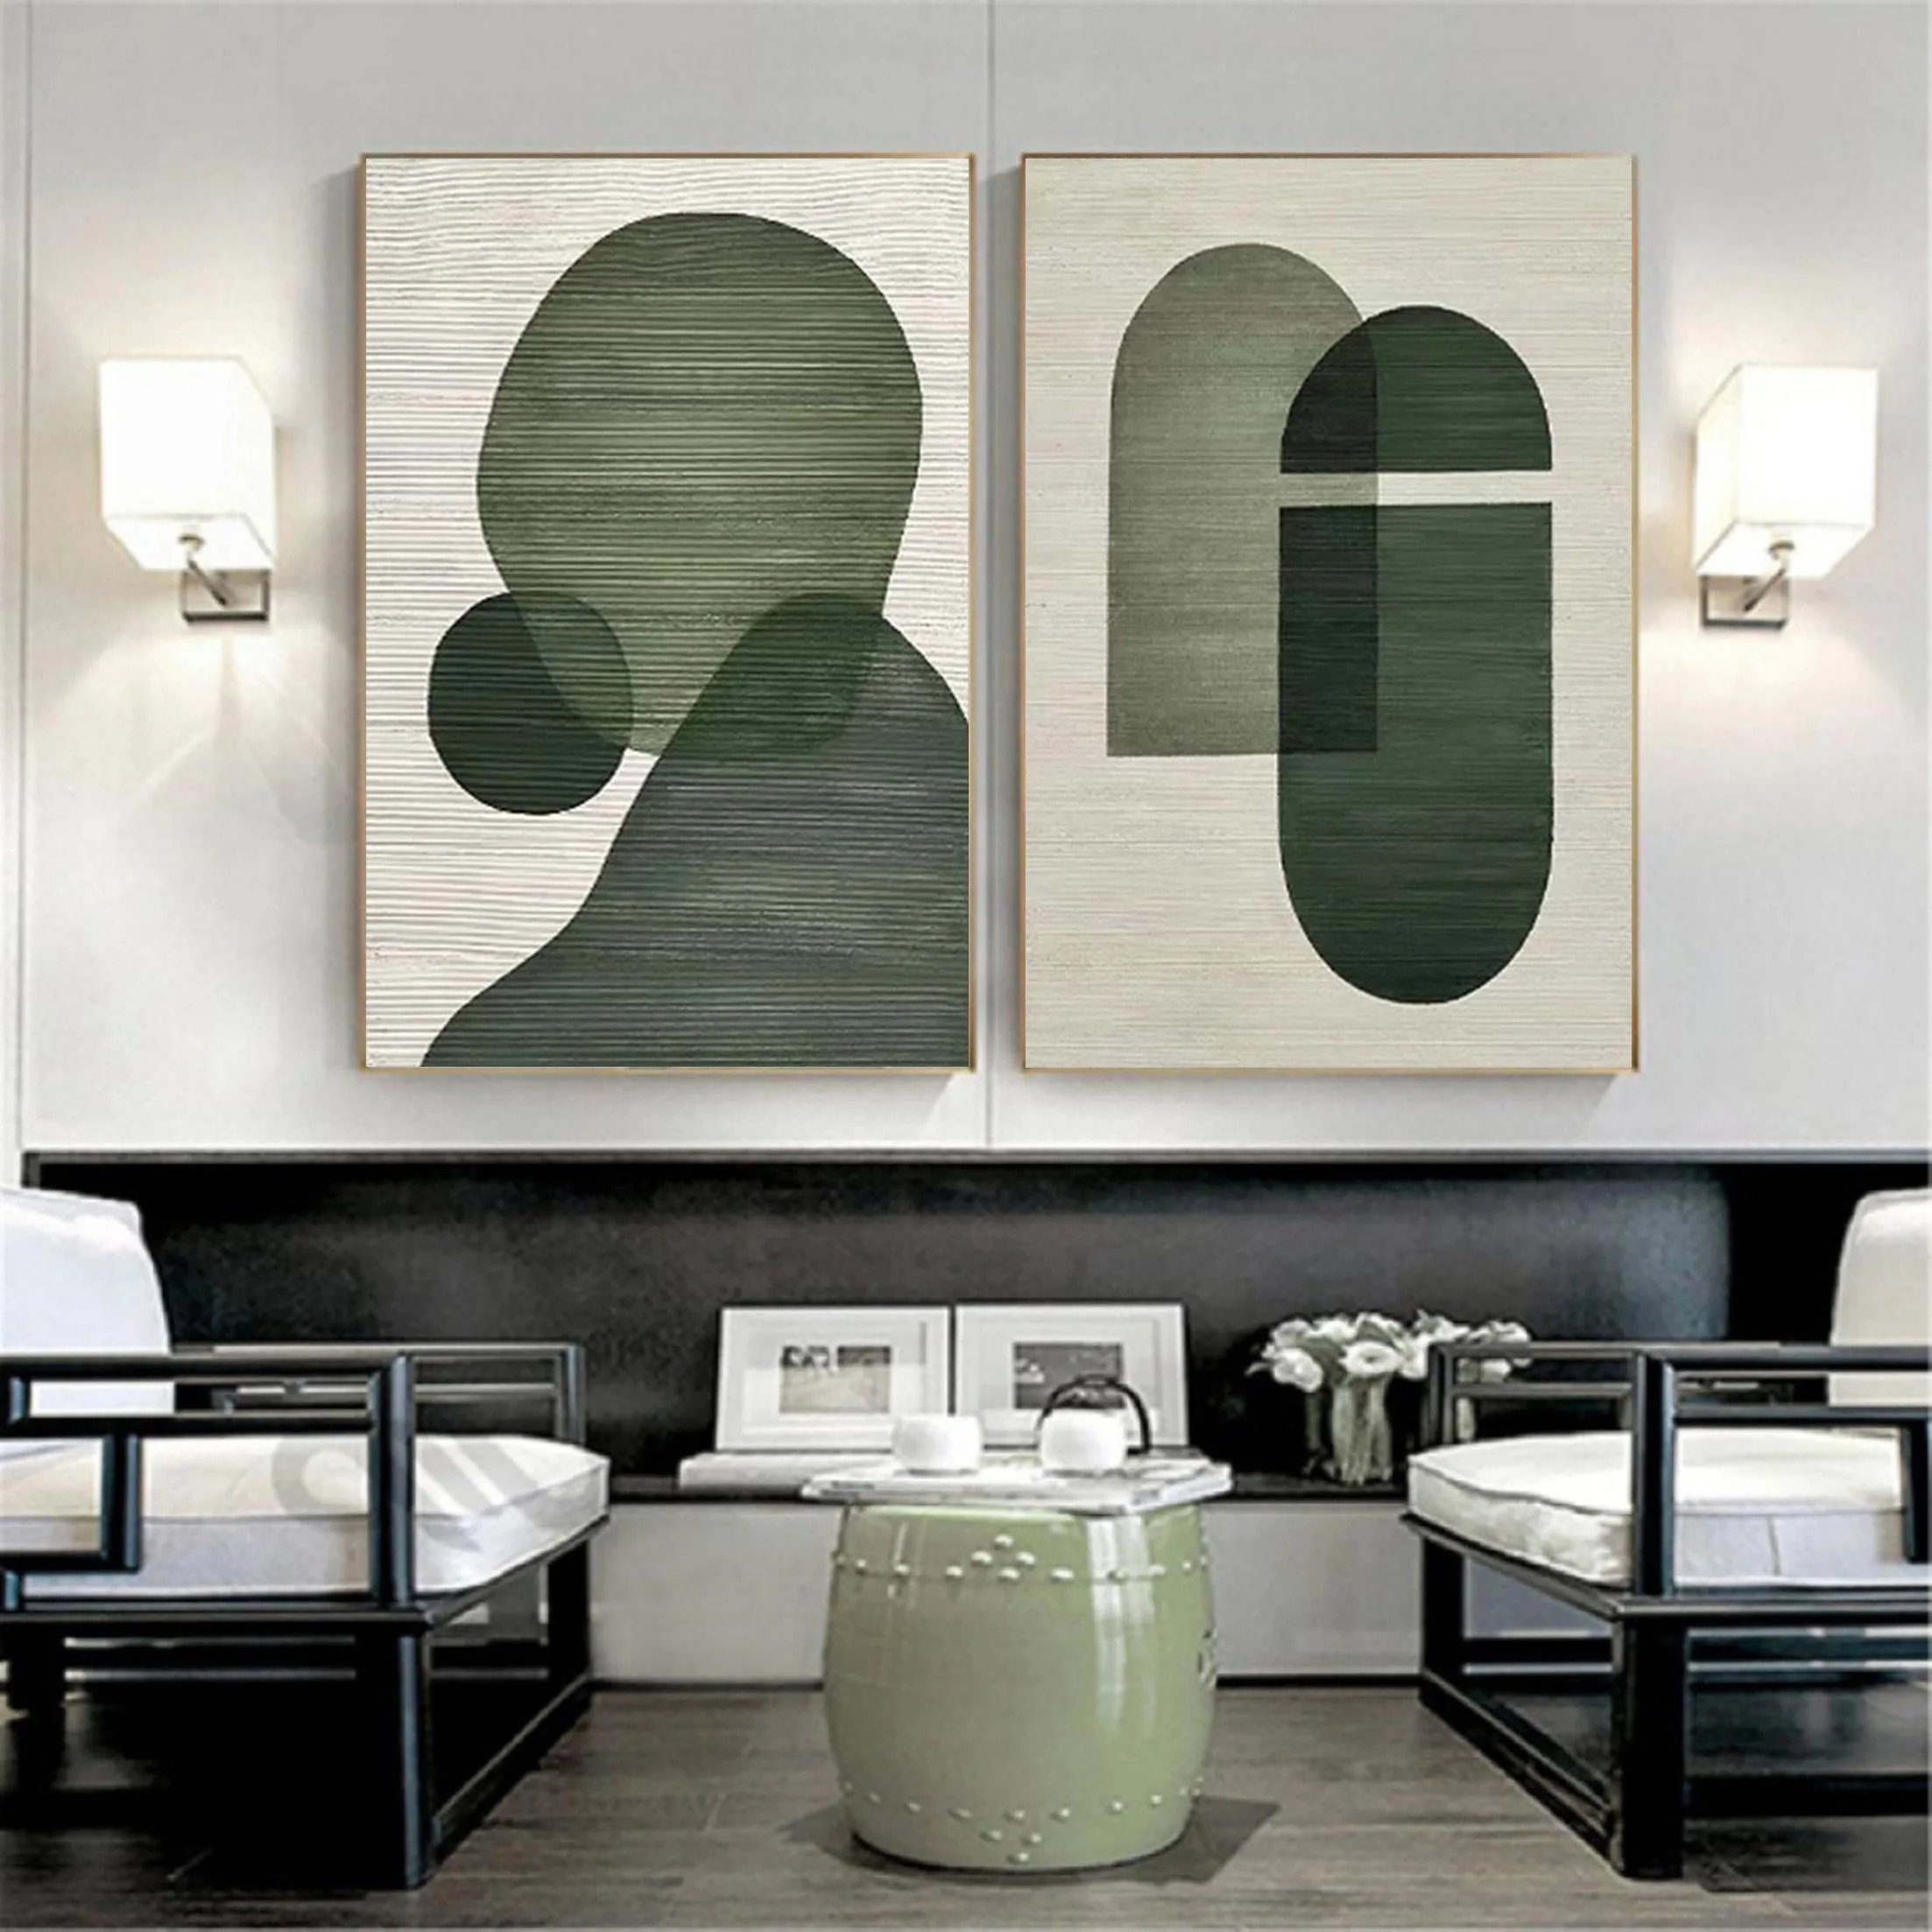 Green Boho Abstract Painting On Canvas Minimalist Textured Wall Art Modern Home Decor